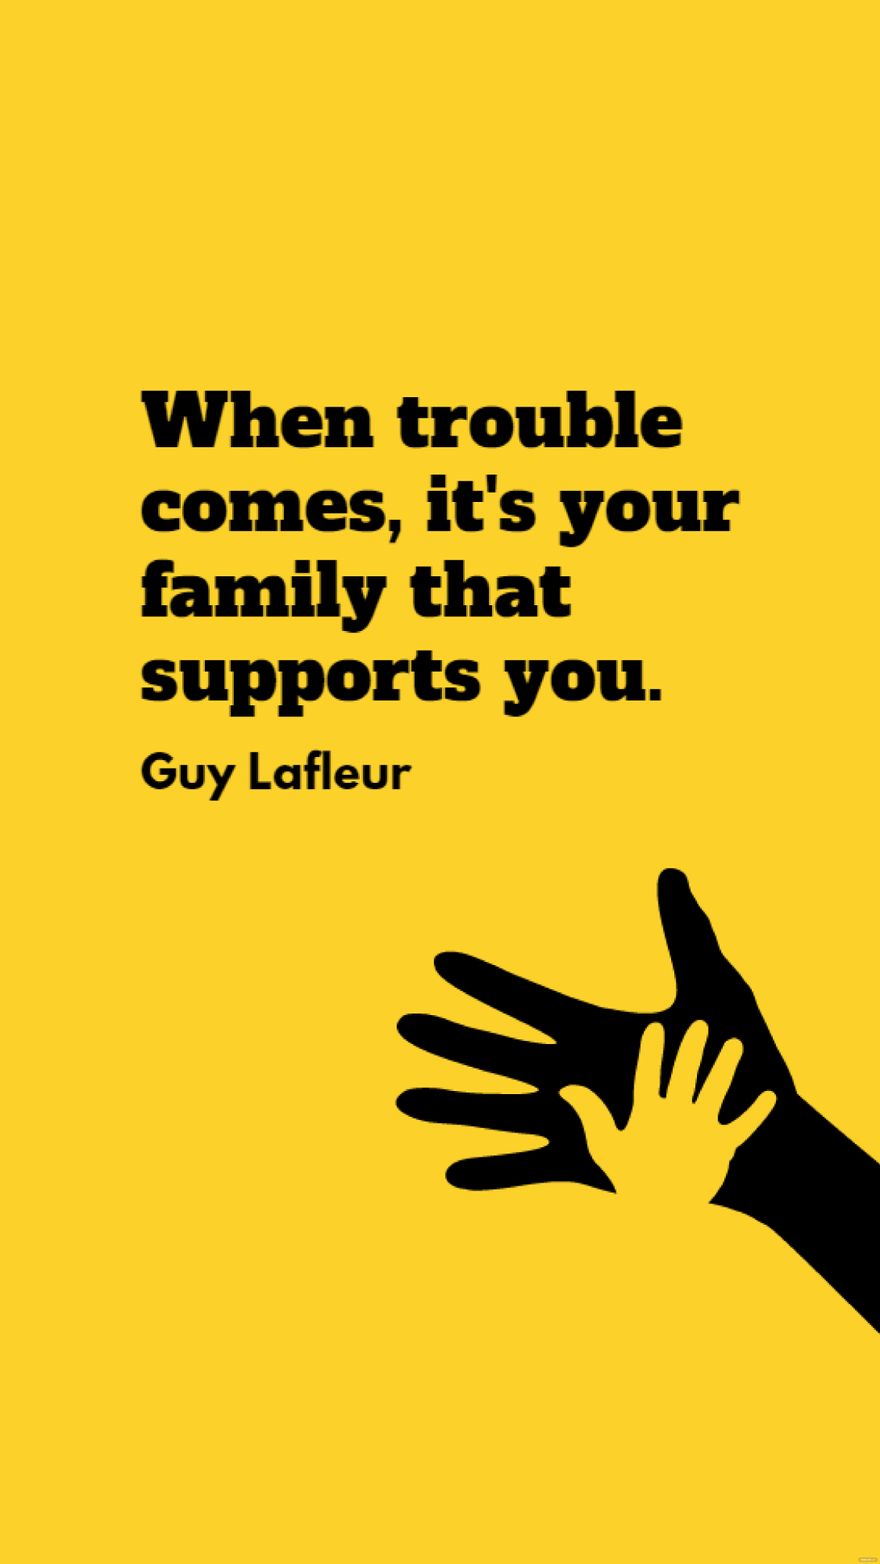 Free Guy Lafleur - When trouble comes, it's your family that supports you. in JPG